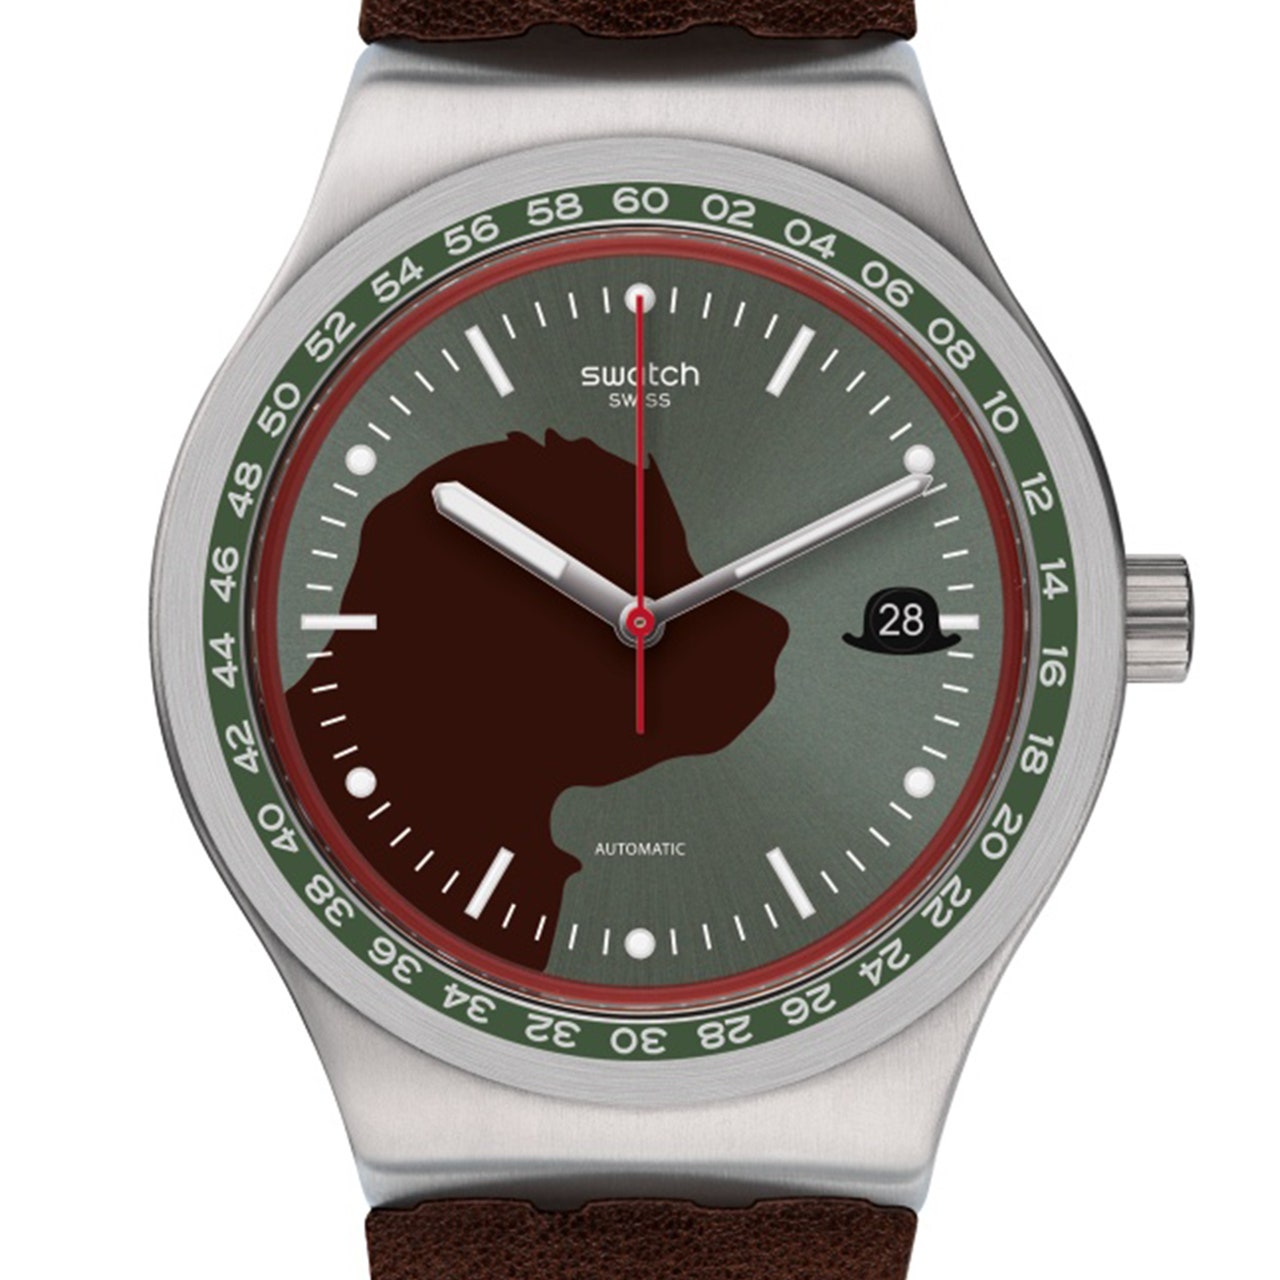 Hounds meet horology as Hackett teams up with Swatch